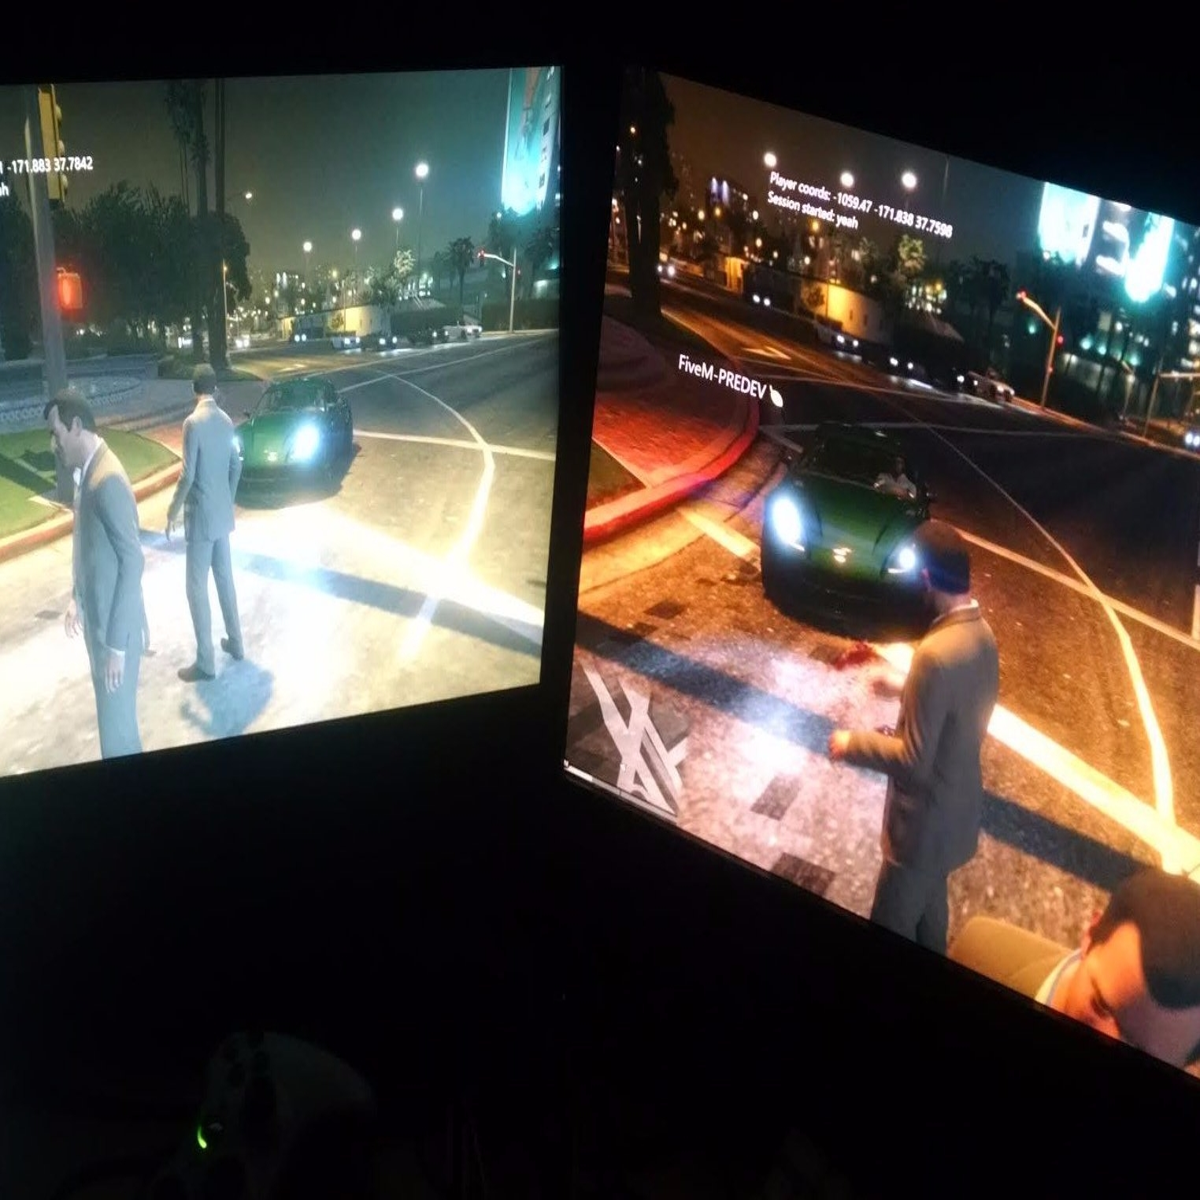 GTA5 modders who made their own multiplayer banned by Rockstar